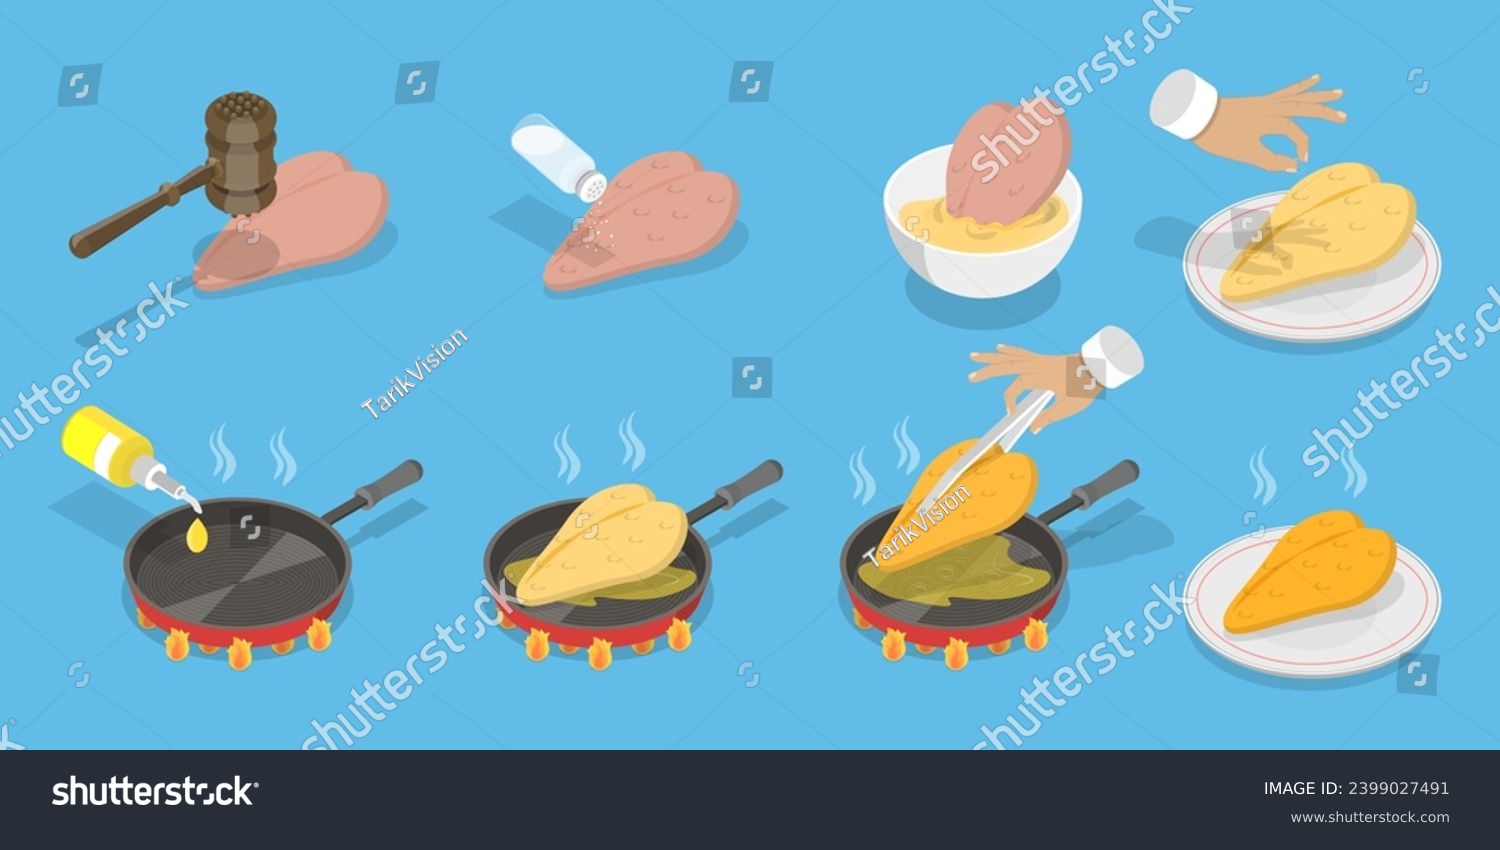 SVG of 3D Isometric Flat Vector Illustration of How To Prepare Chicken Schnitzel svg